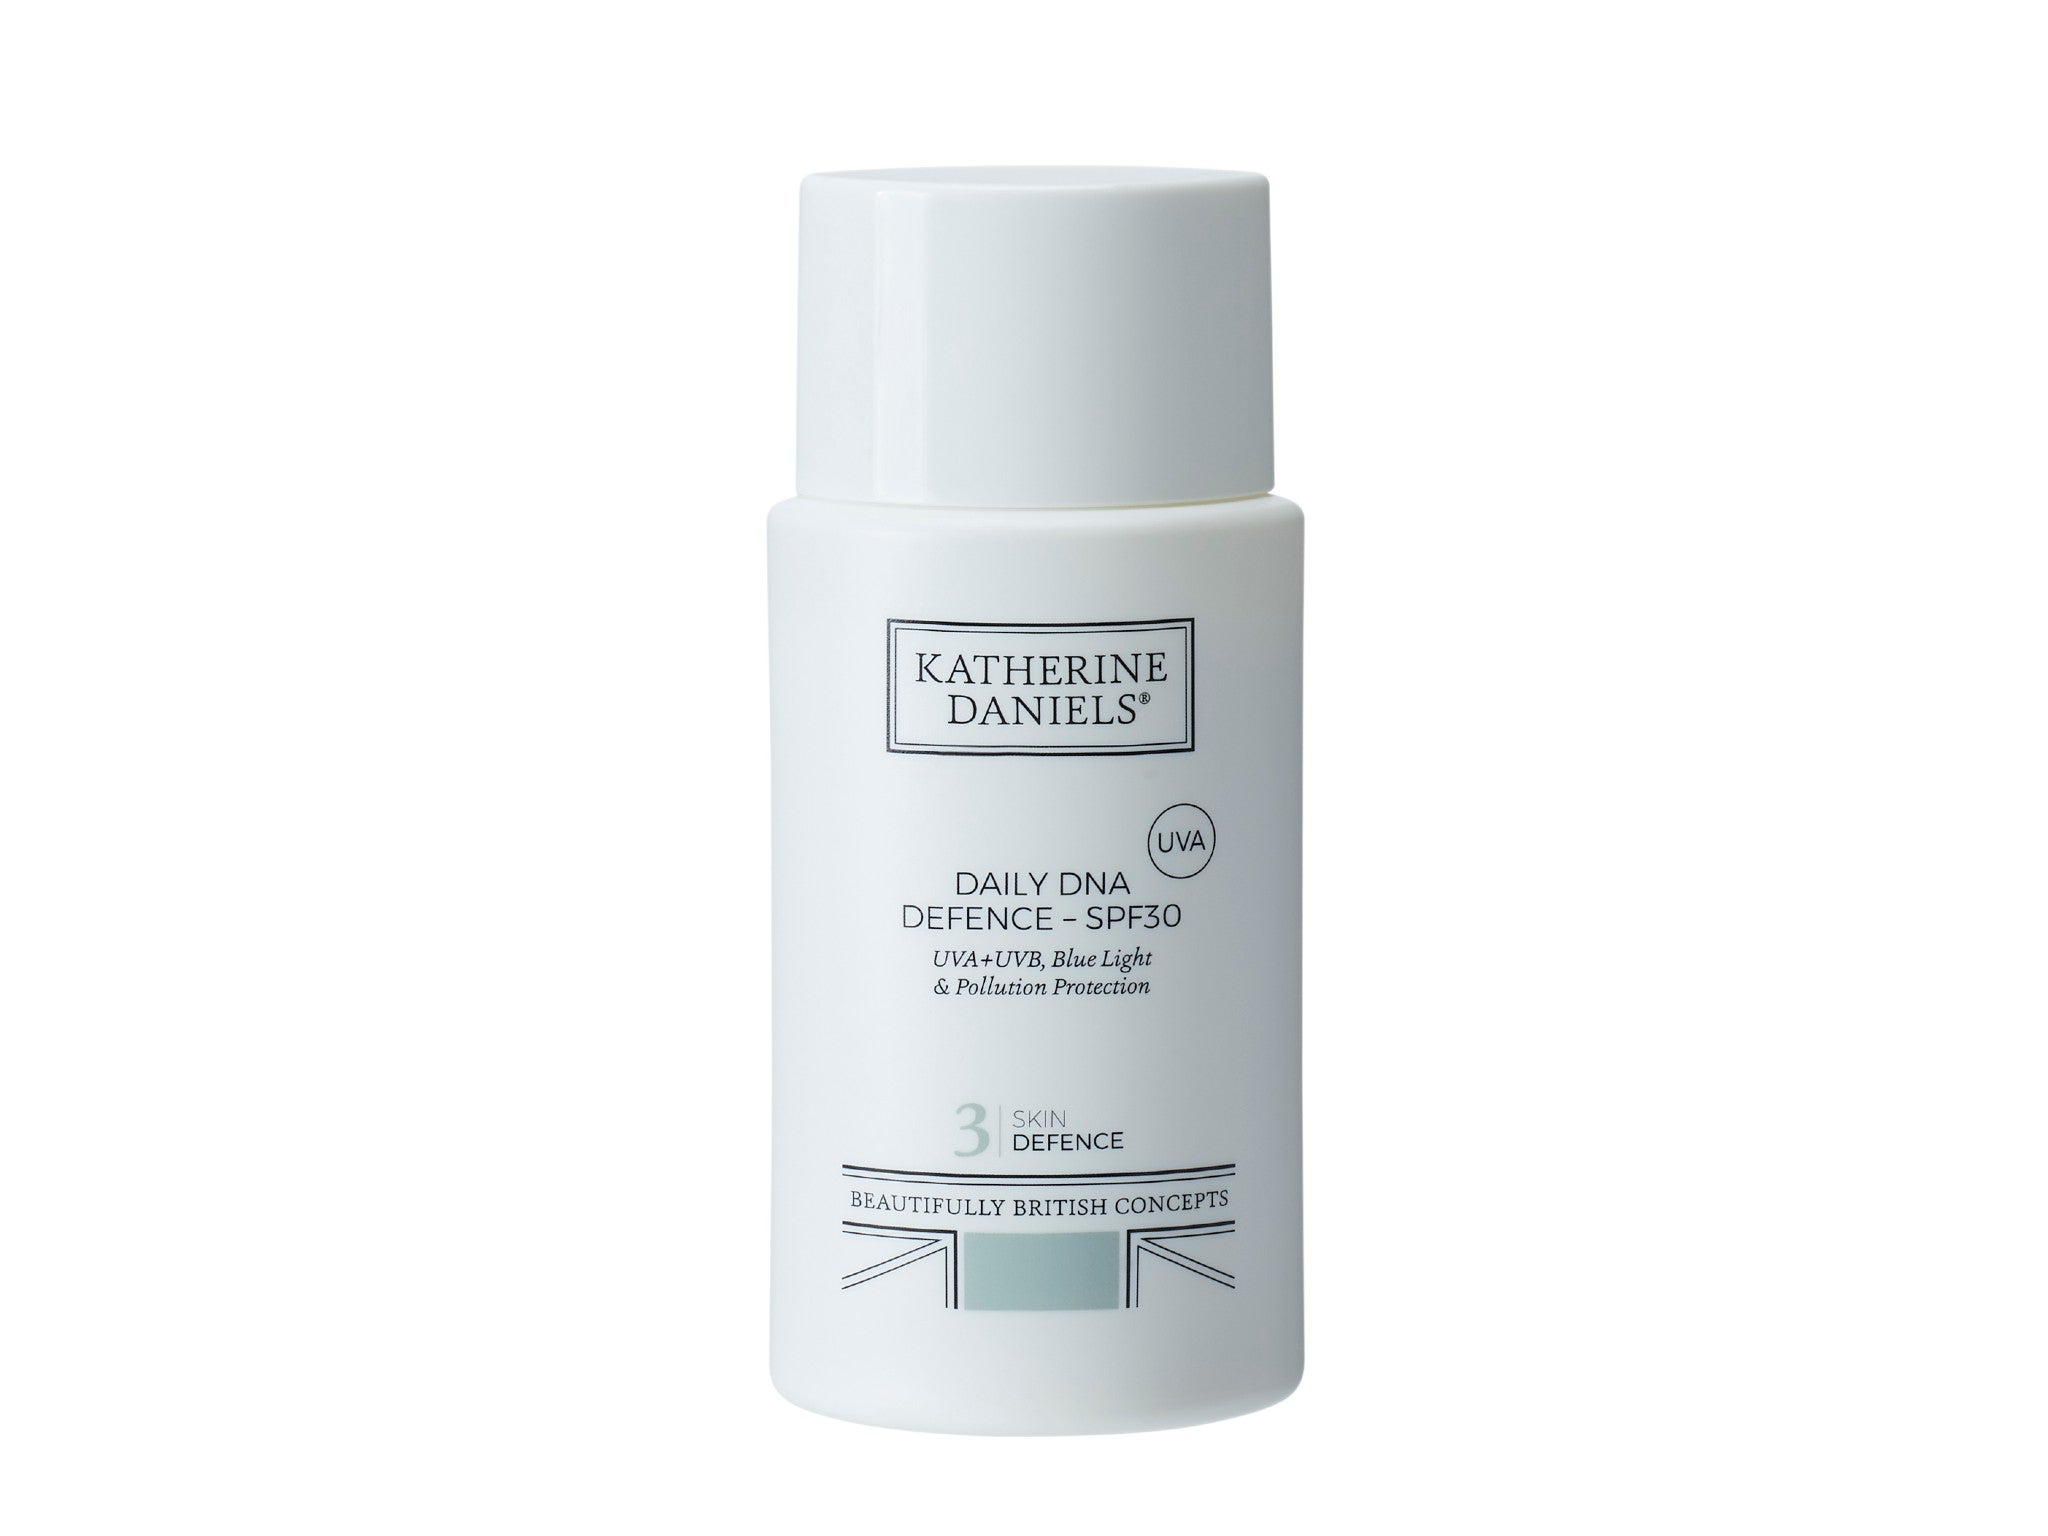 Katherine Daniels daily DNA defence SPF30 indybest